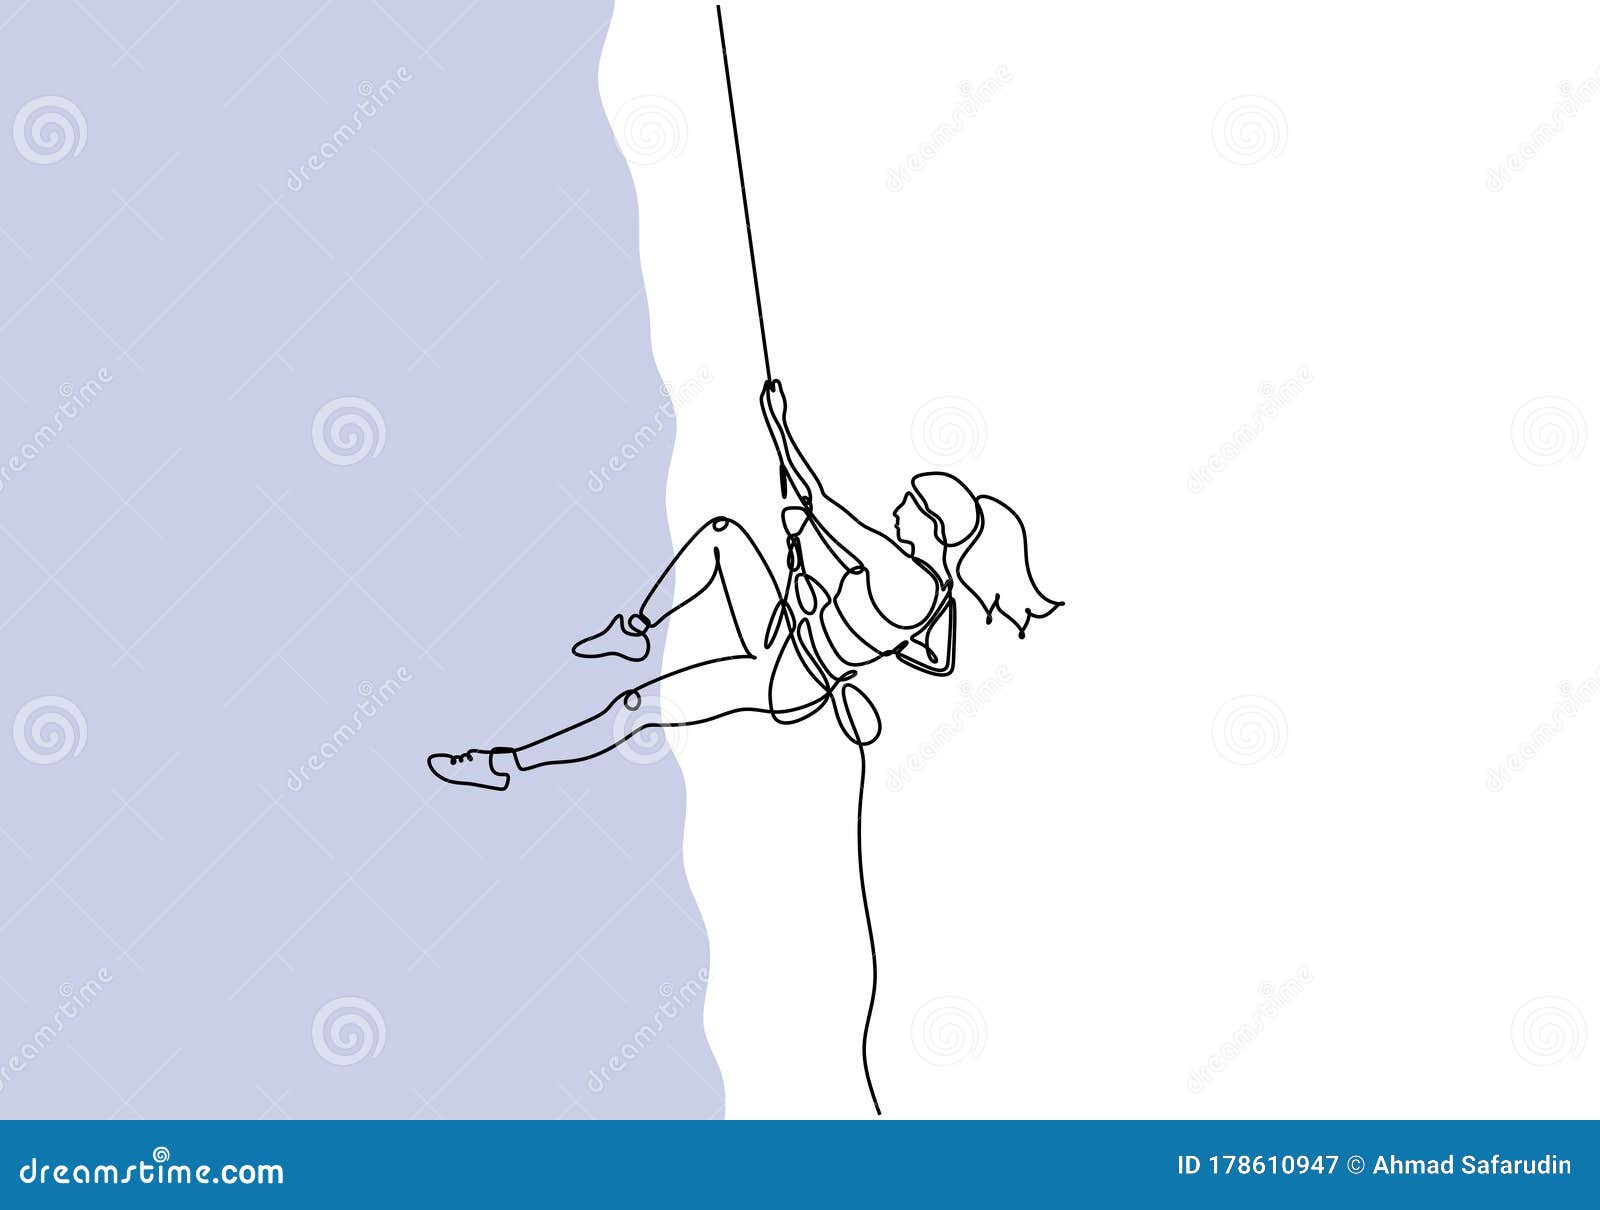 Extreme Sport One Line Drawing. Girl Doing Rock Climbing with a